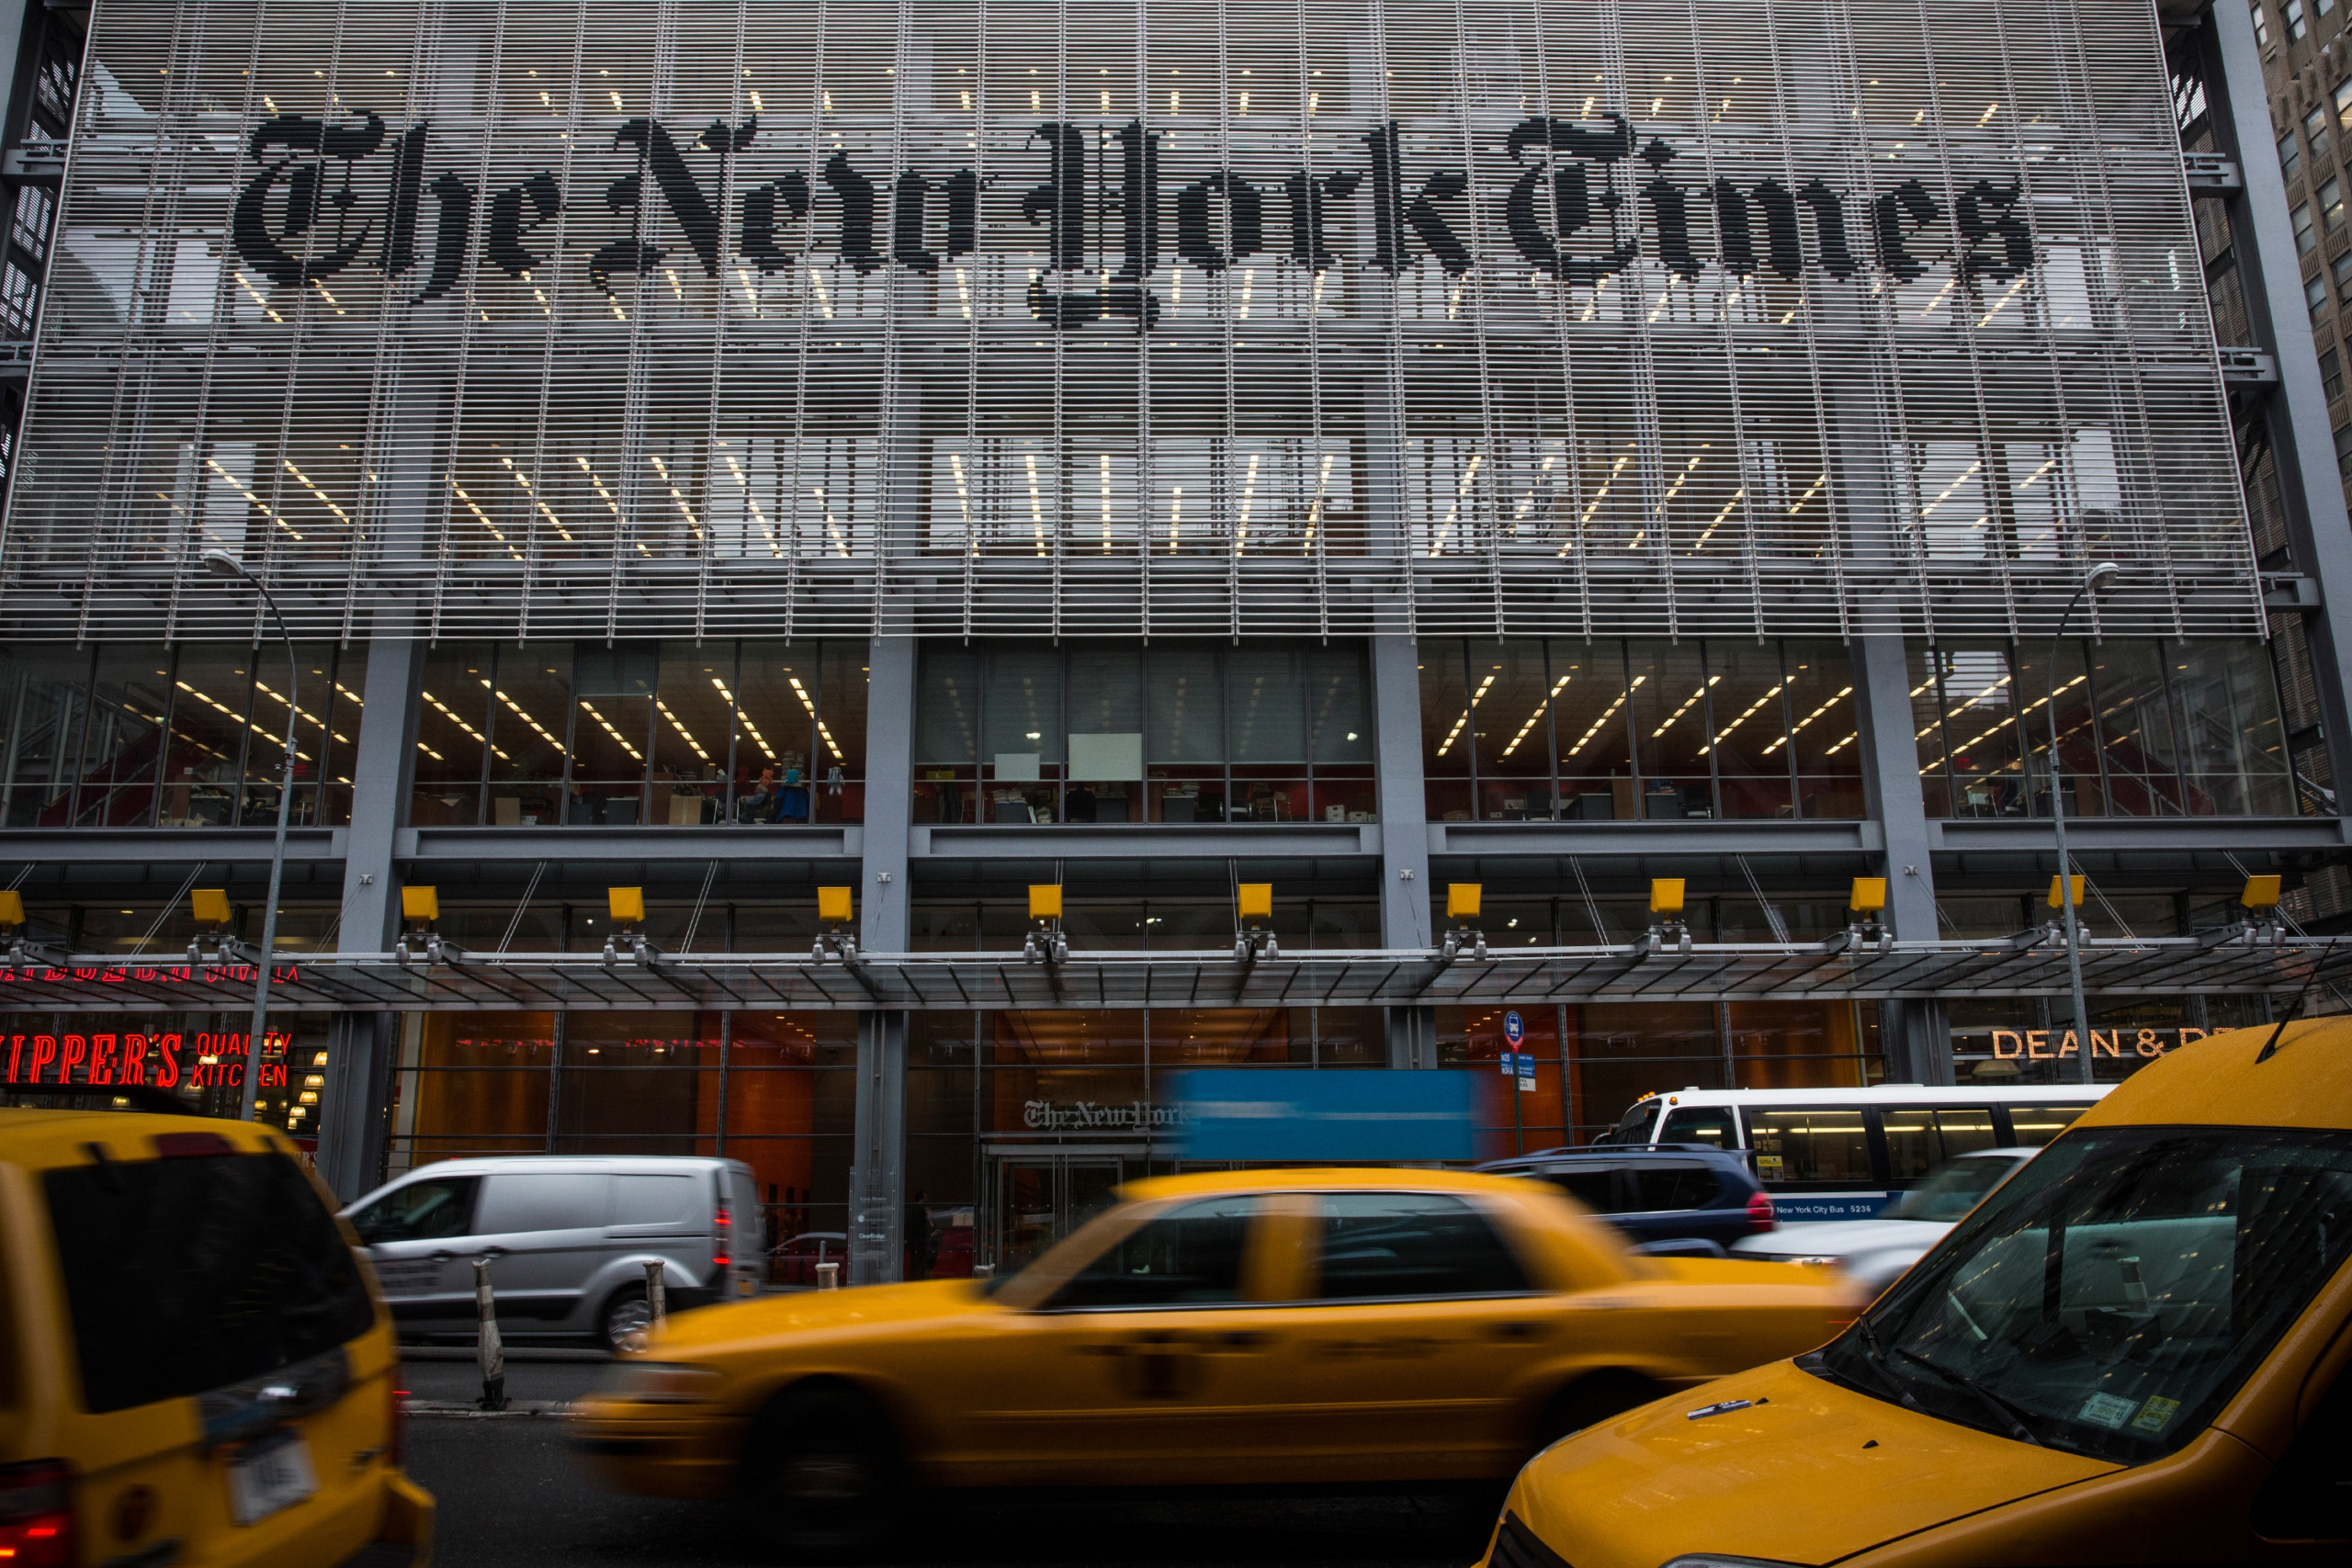 New York Times Union Members’ Ultimatum, Threaten to Walk out for 24 Hours If Demands Not Met